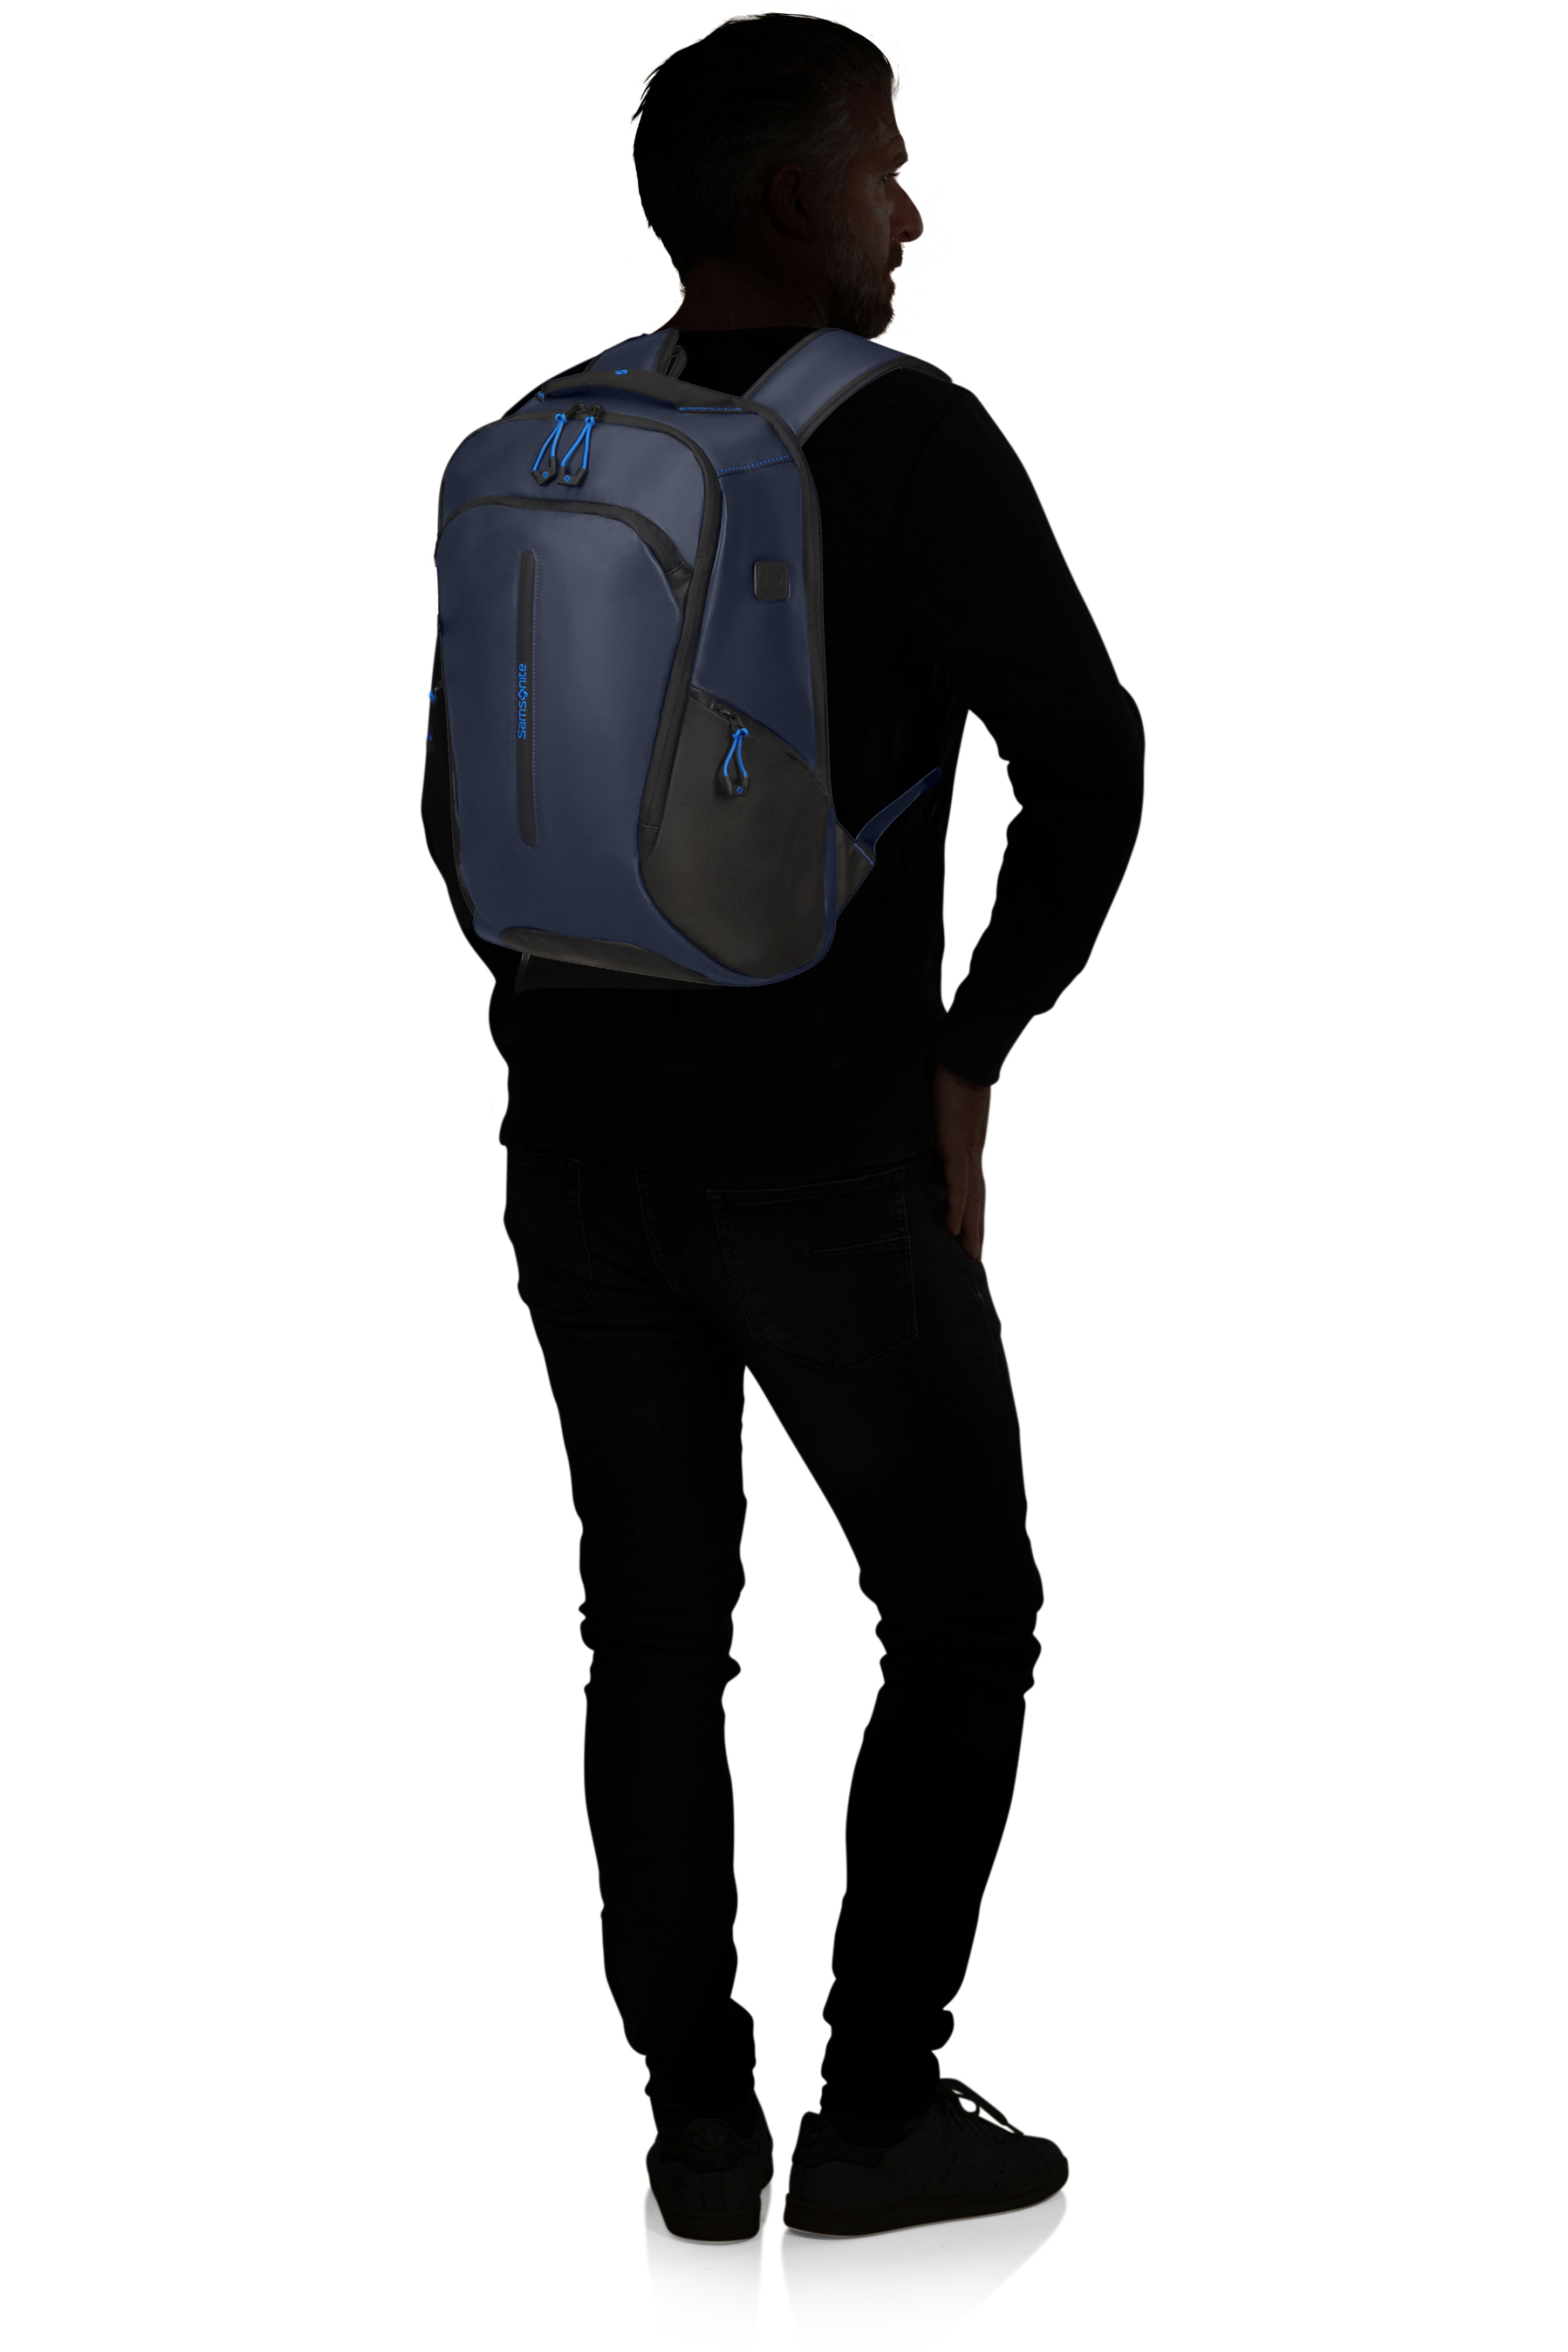 140874-2165-140874_2165_ecodiver_urban_lap-_backpack_m_usb_with%20silhouette-463f5c6c-ca57-4e55-bd24-ae6d00cbc070-png